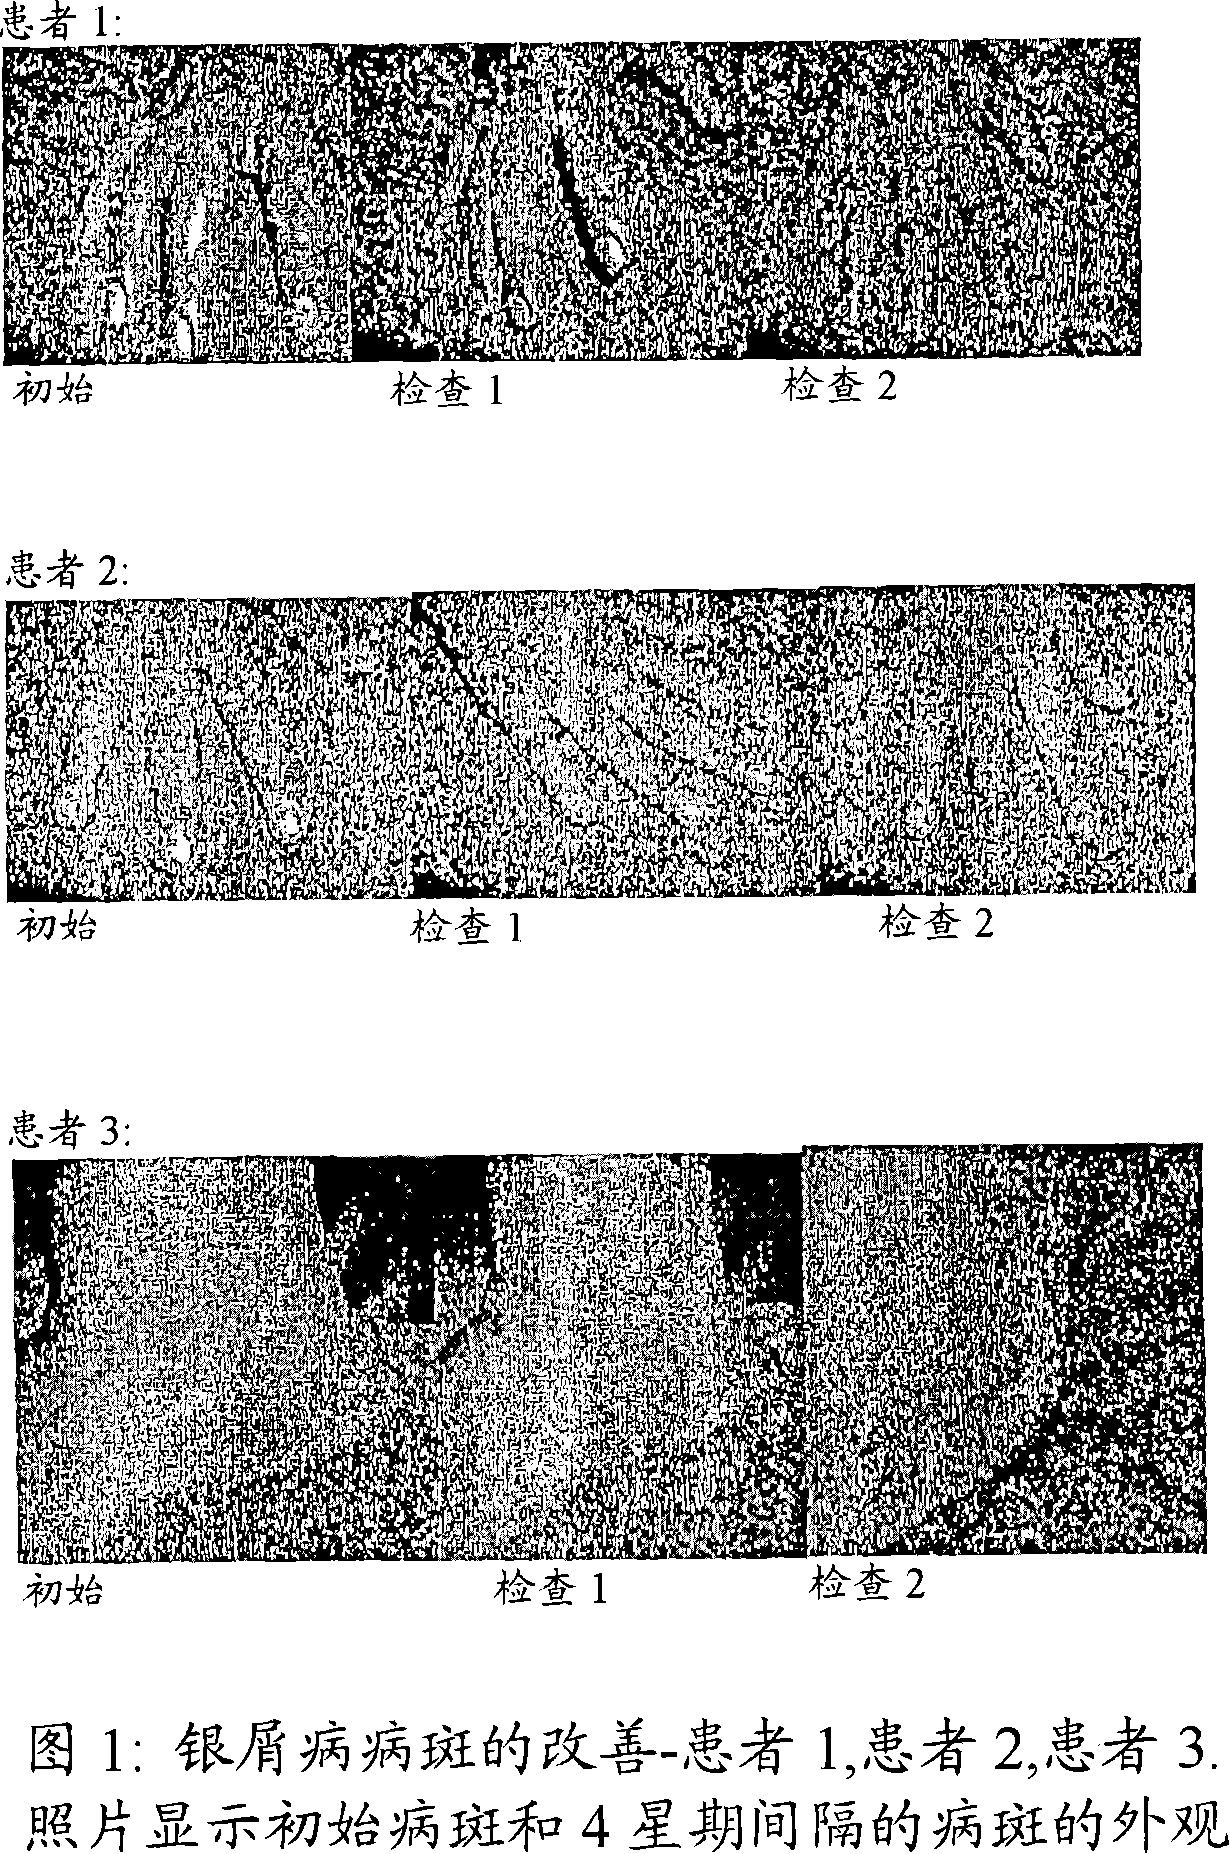 Compositions and methods for the management of hyperproliferative dermatological conditions